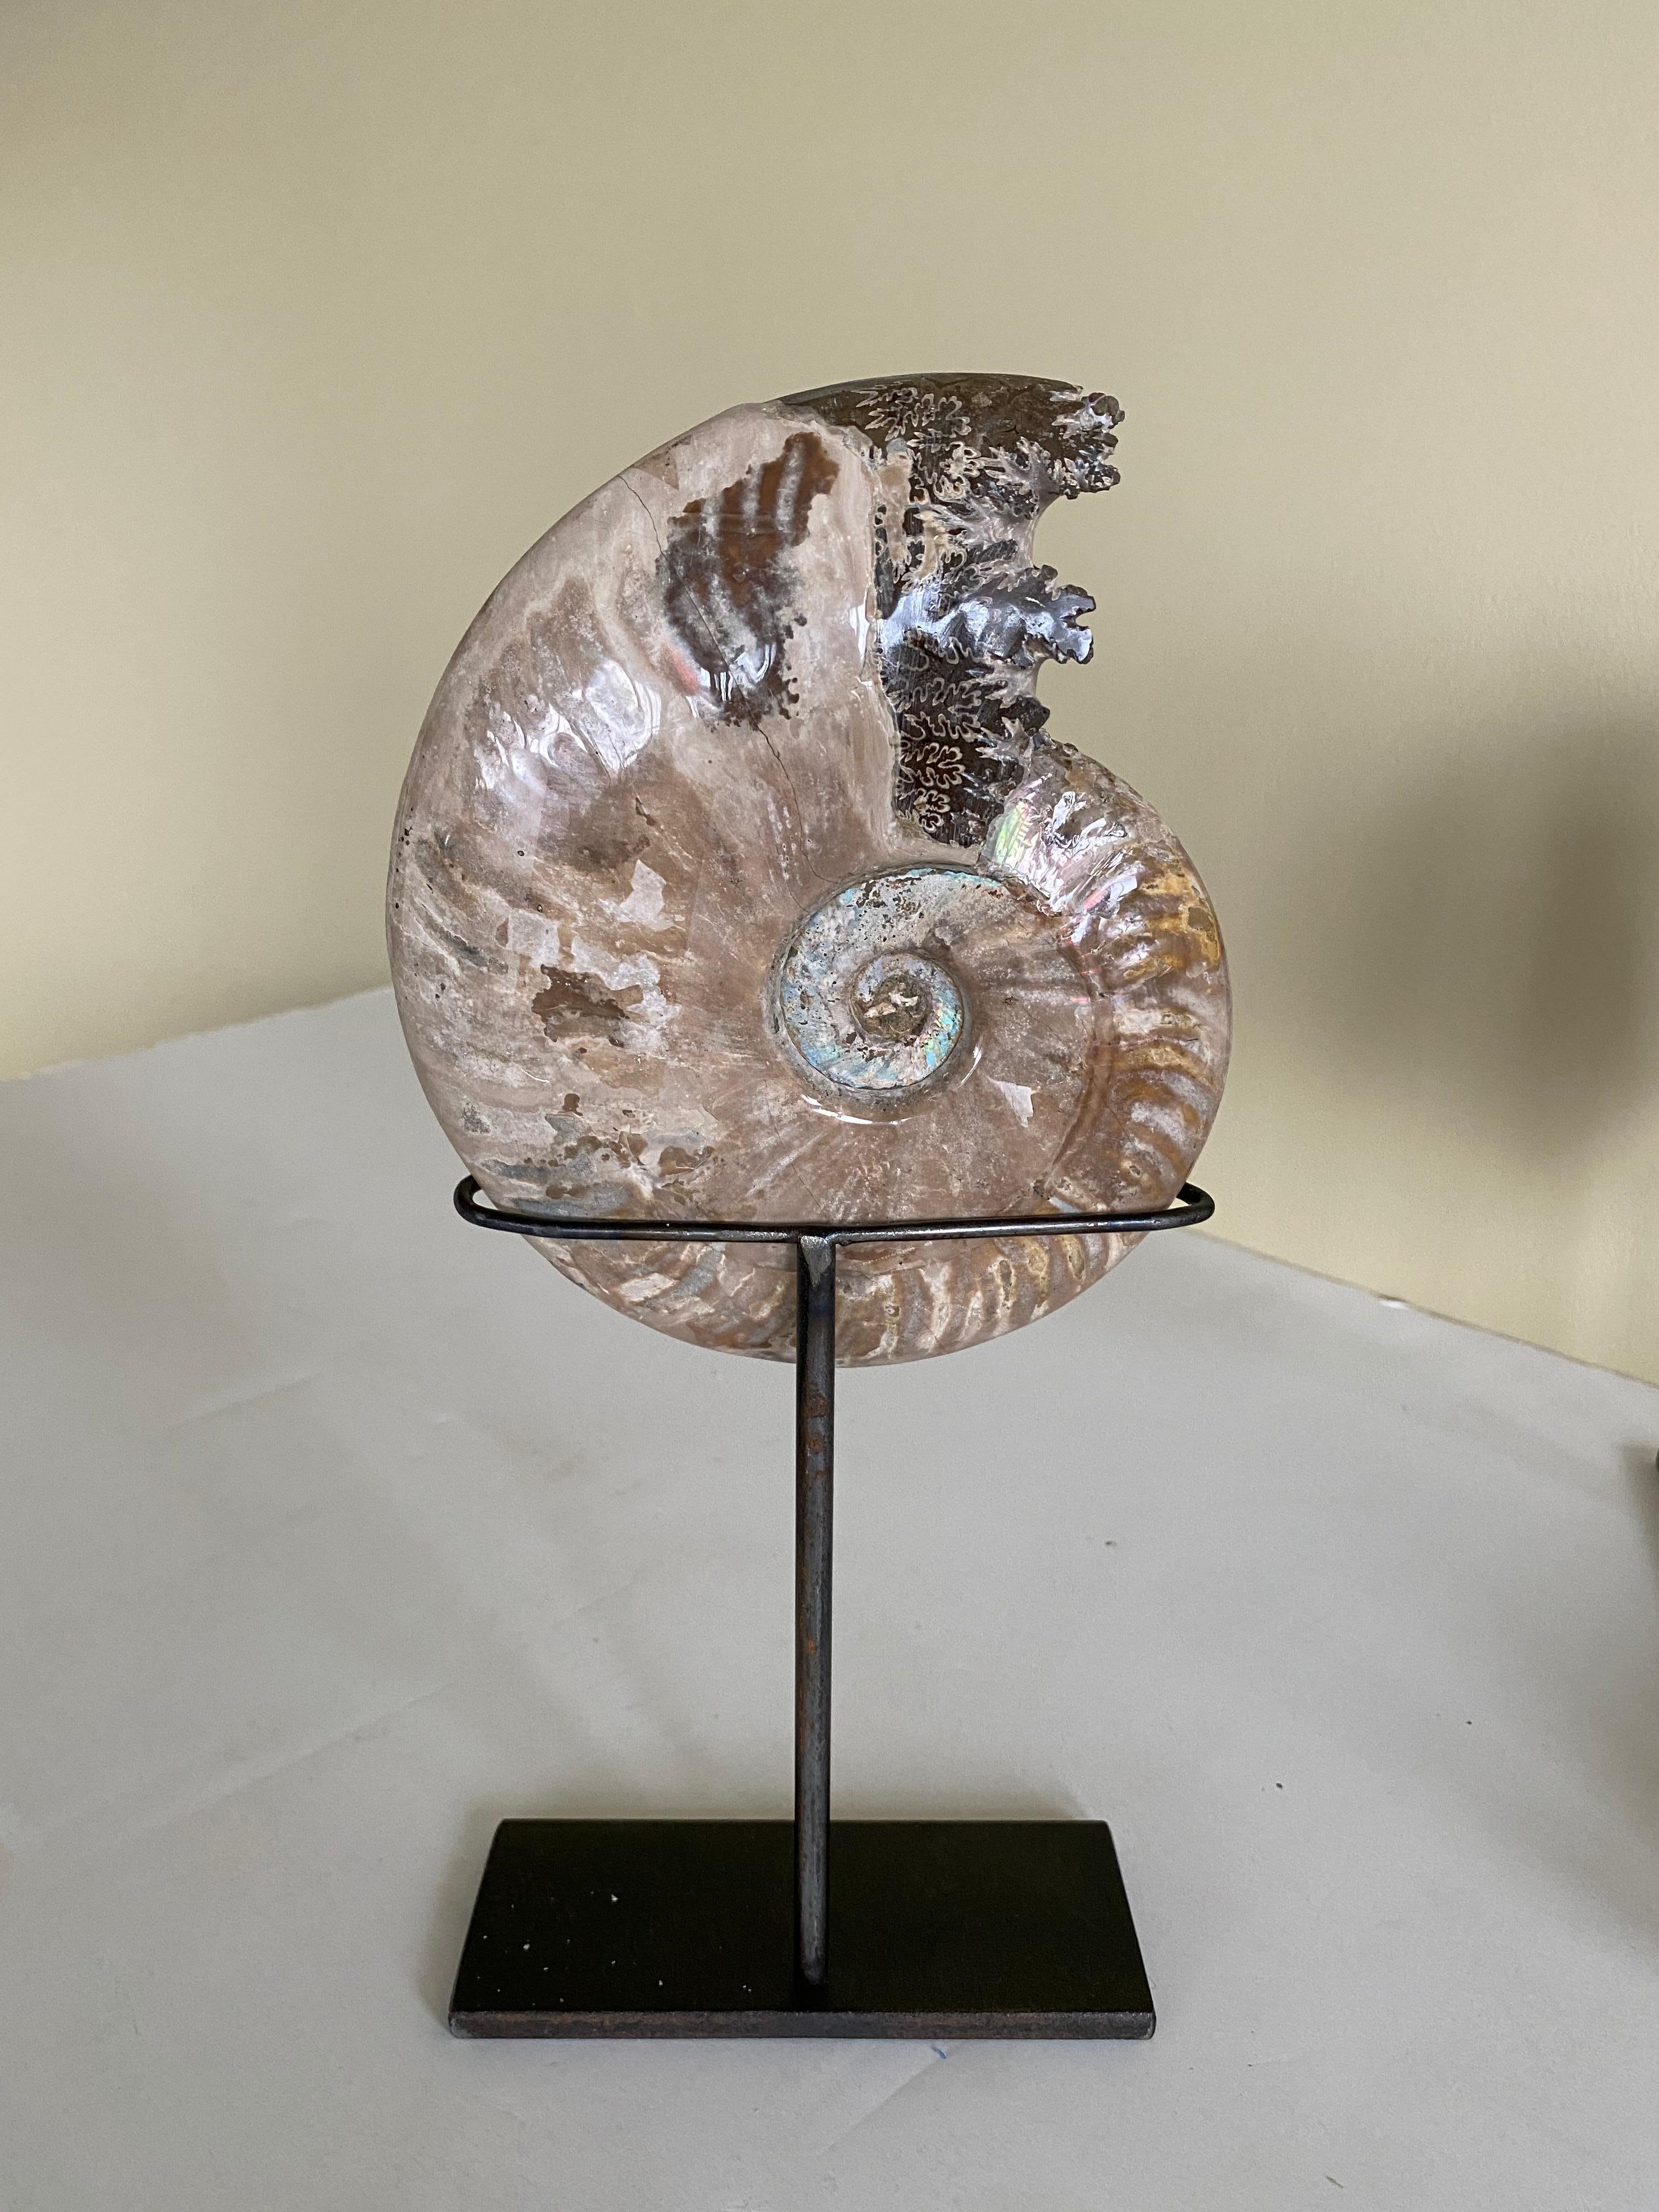 Prehistoric single polished ammonite on custom steel stand.
From Madagascar
Shades of dark green and brown
Measures: Stand 7